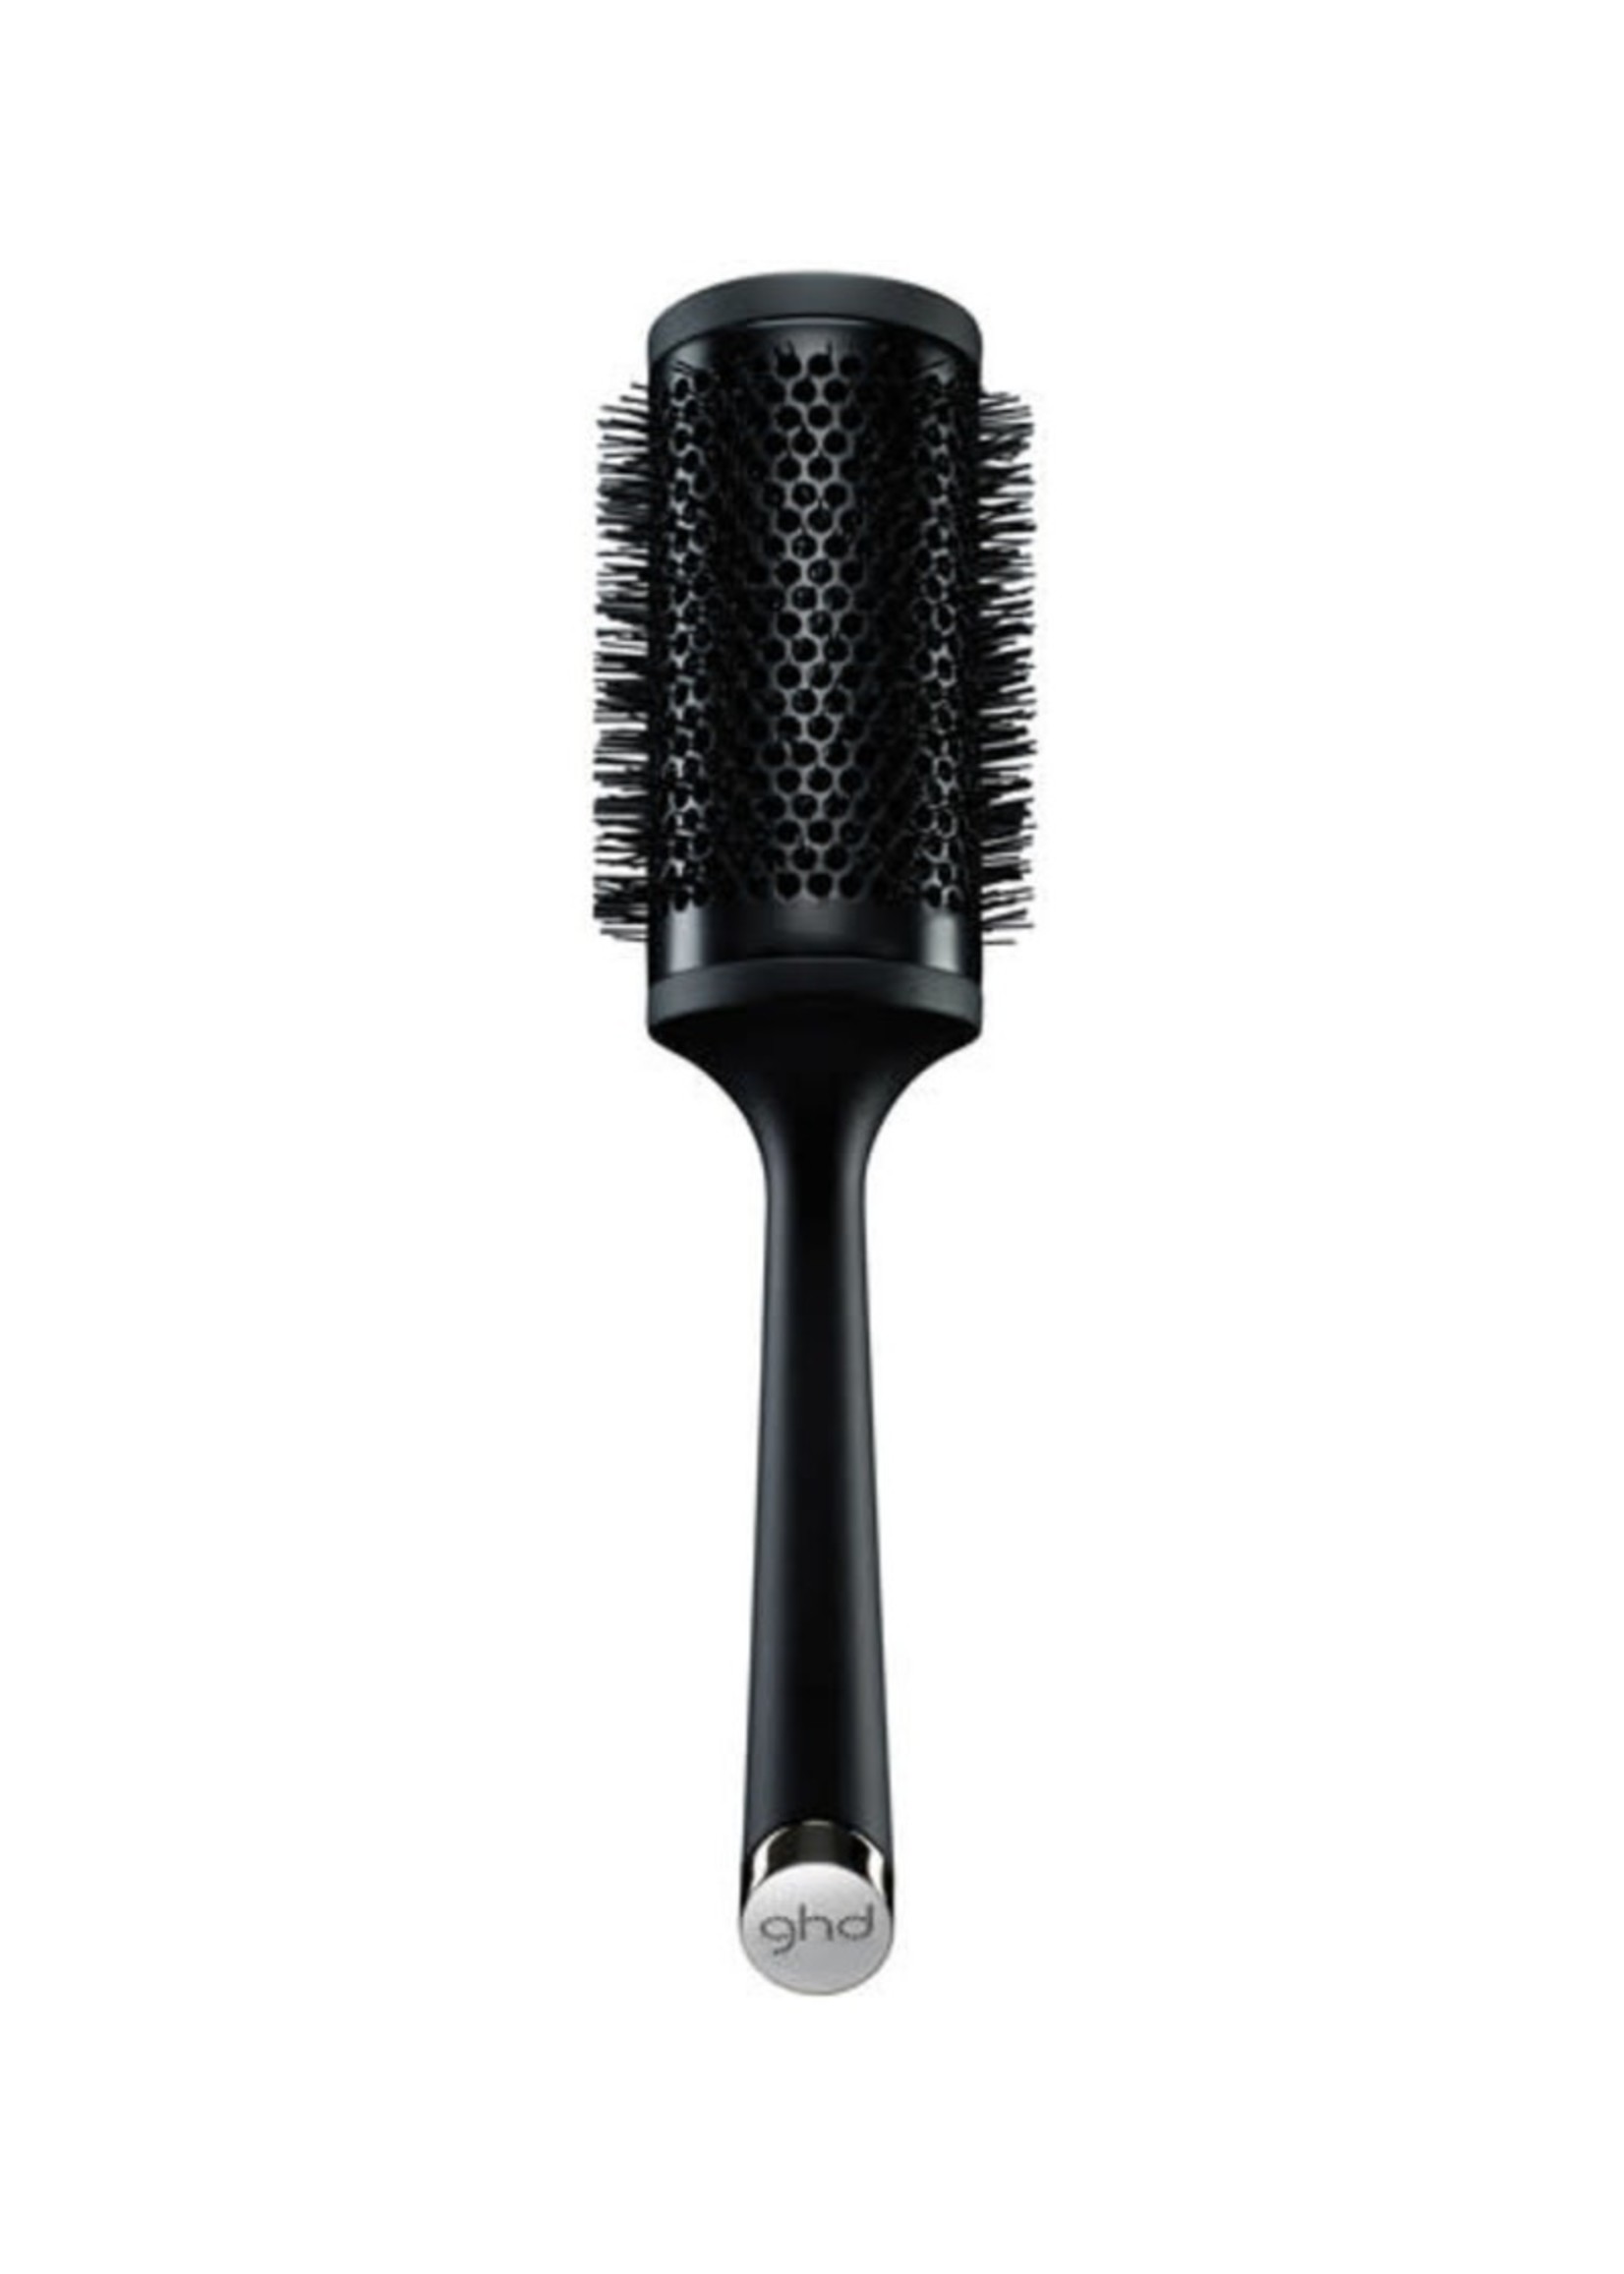 GHD GHD The Blow Dryer Ceramic Vented Radial Brush Size 4